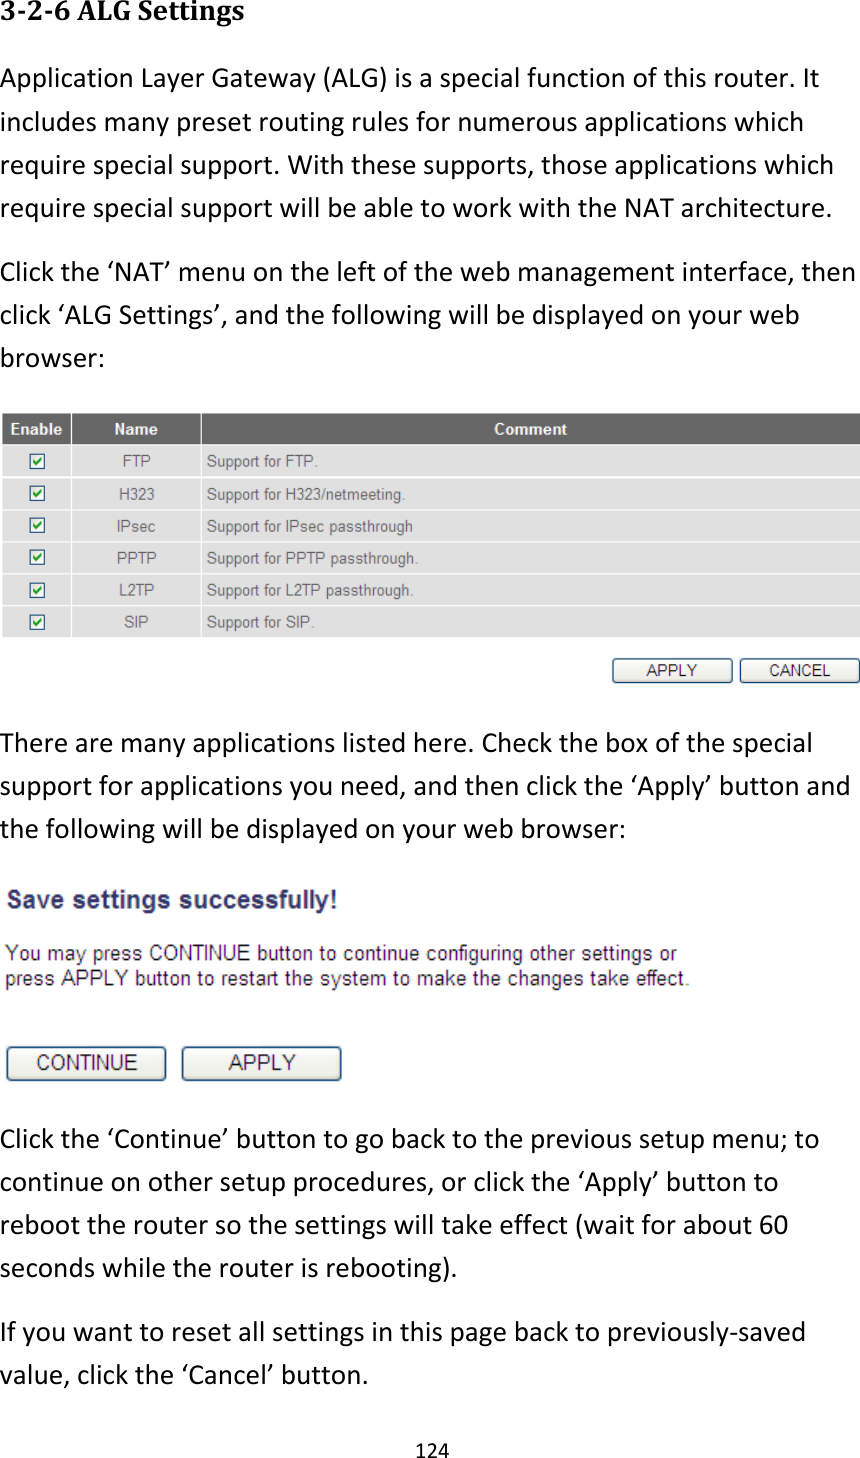 124 3-2-6 ALG Settings Application Layer Gateway (ALG) is a special function of this router. It includes many preset routing rules for numerous applications which require special support. With these supports, those applications which require special support will be able to work with the NAT architecture. Click the ‘NAT’ menu on the left of the web management interface, then click ‘ALG Settings’, and the following will be displayed on your web browser:  There are many applications listed here. Check the box of the special support for applications you need, and then click the ‘Apply’ button and the following will be displayed on your web browser:  Click the ‘Continue’ button to go back to the previous setup menu; to continue on other setup procedures, or click the ‘Apply’ button to reboot the router so the settings will take effect (wait for about 60 seconds while the router is rebooting). If you want to reset all settings in this page back to previously-saved value, click the ‘Cancel’ button. 